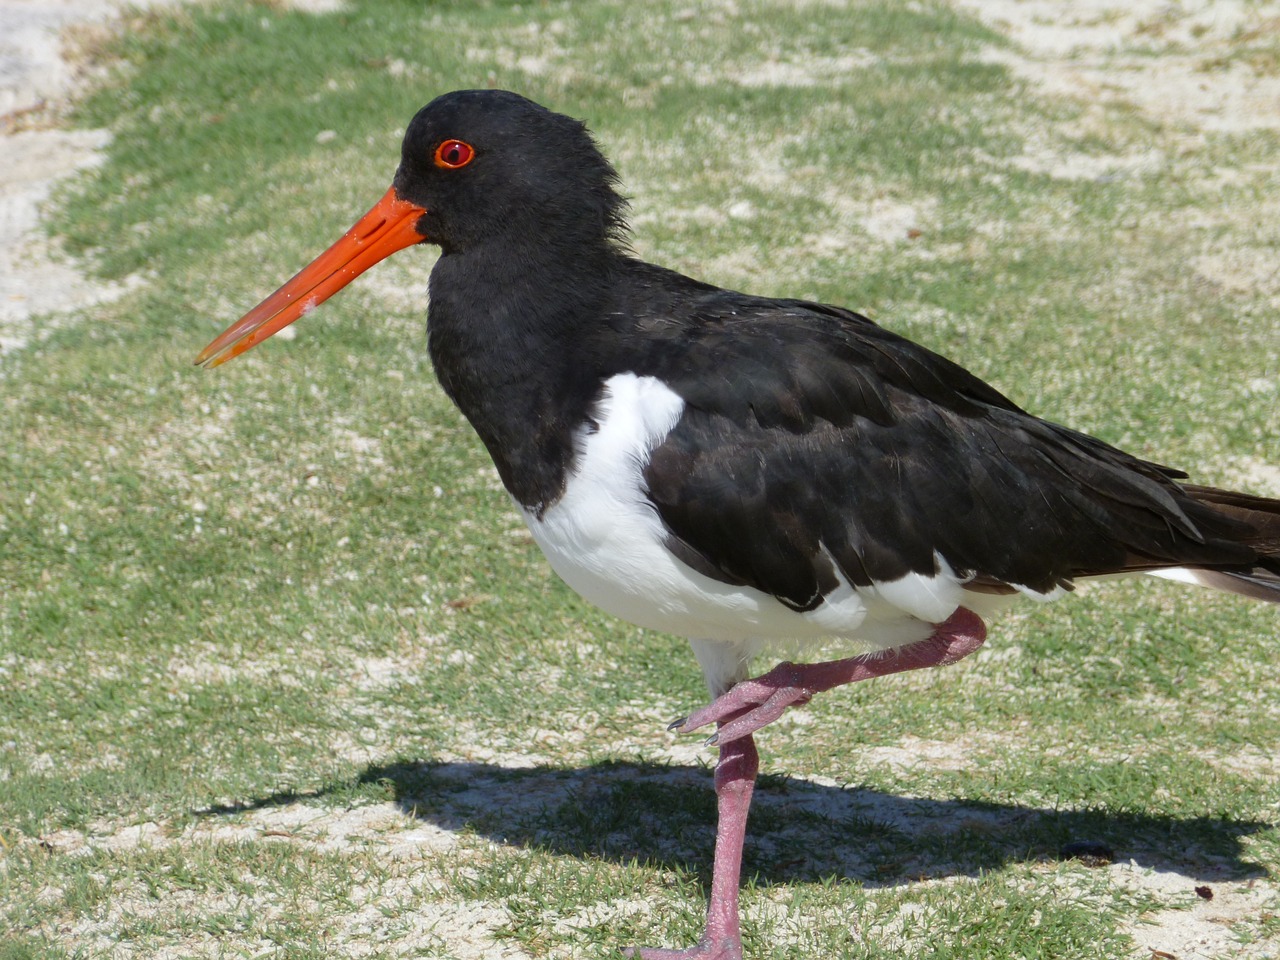 A photo of a pied oystercatcher standing on one leg. The bird is black and white in colour, with an orange, pointy beak.